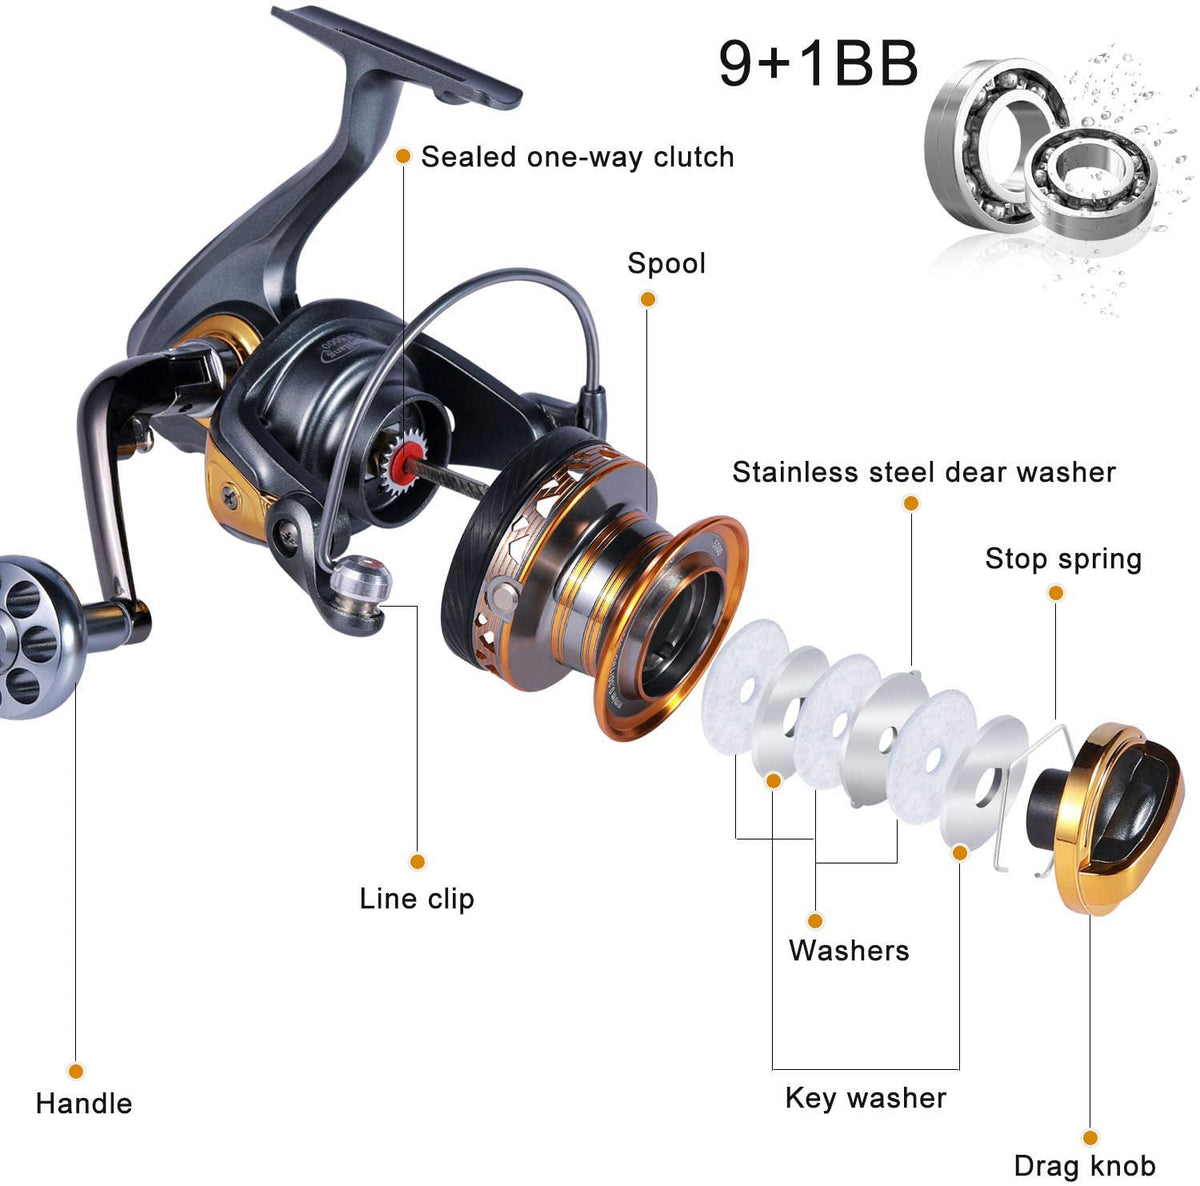 Sougayilang Fishing Reel, Colorful Aluminum Frame Spinning Reels with -  12+1 Stainless BB, Oversize Aluminum Handle for Saltwater or Freshwater  Fishing- GSM7000 - Yahoo Shopping